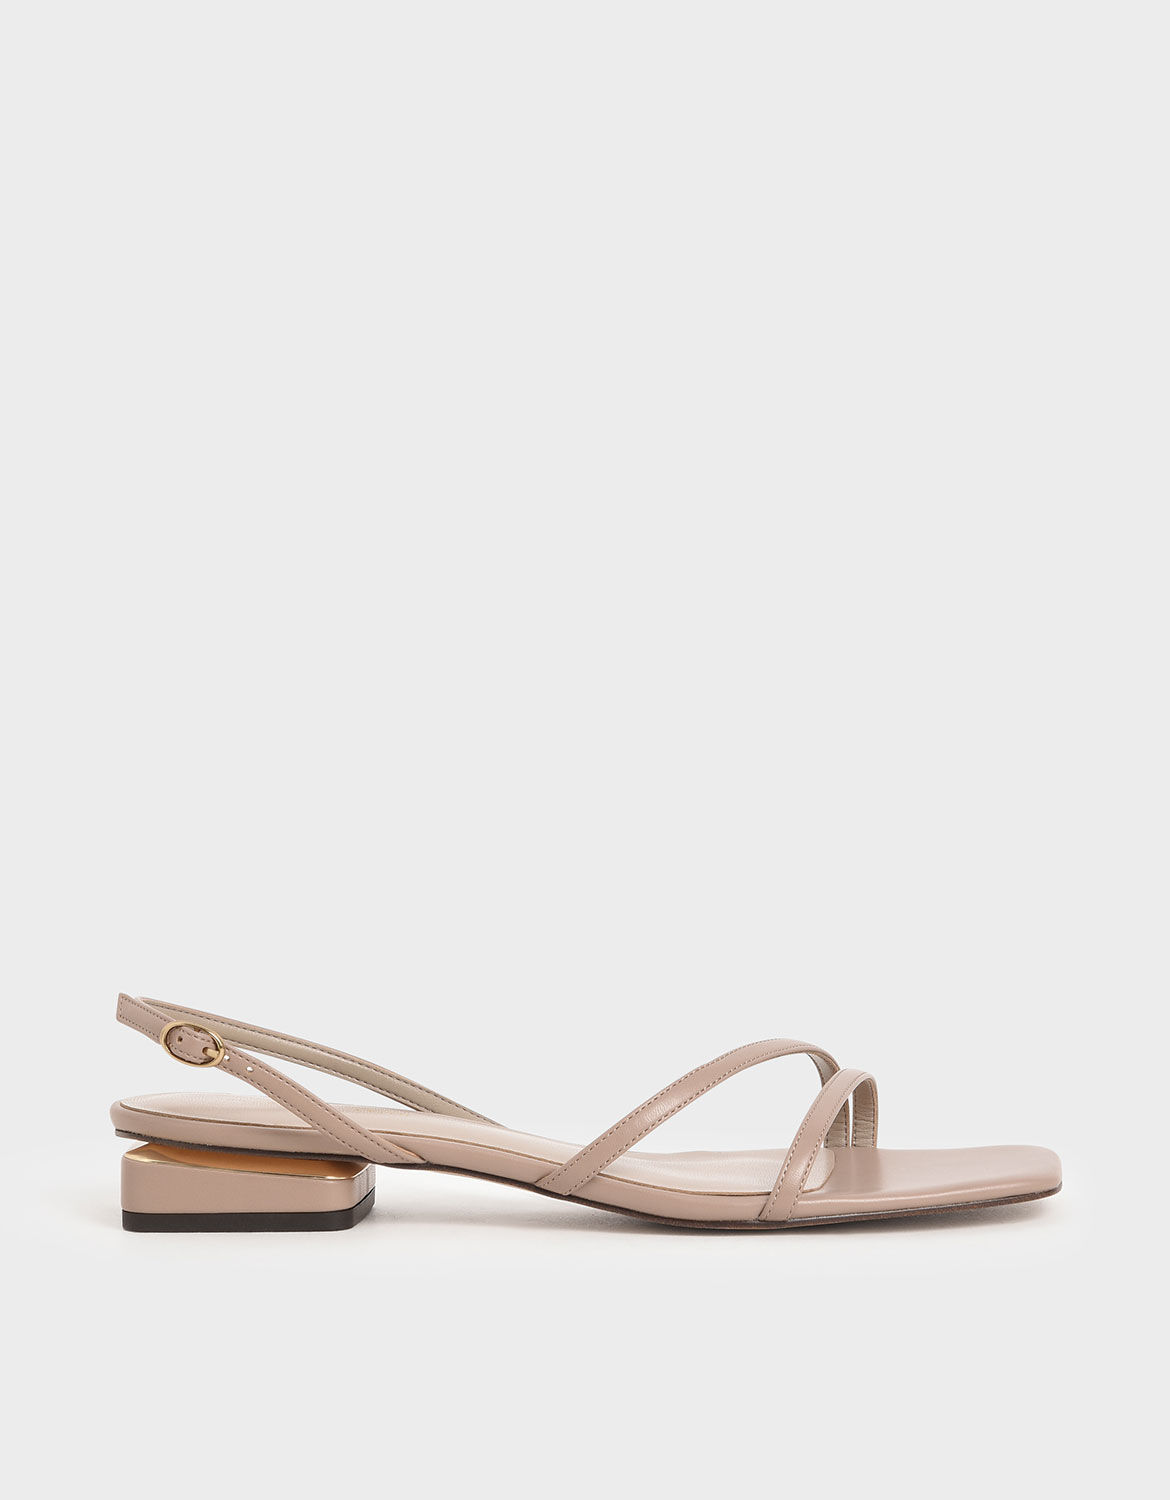 Taupe Strappy Slingback Heels | CHARLES 